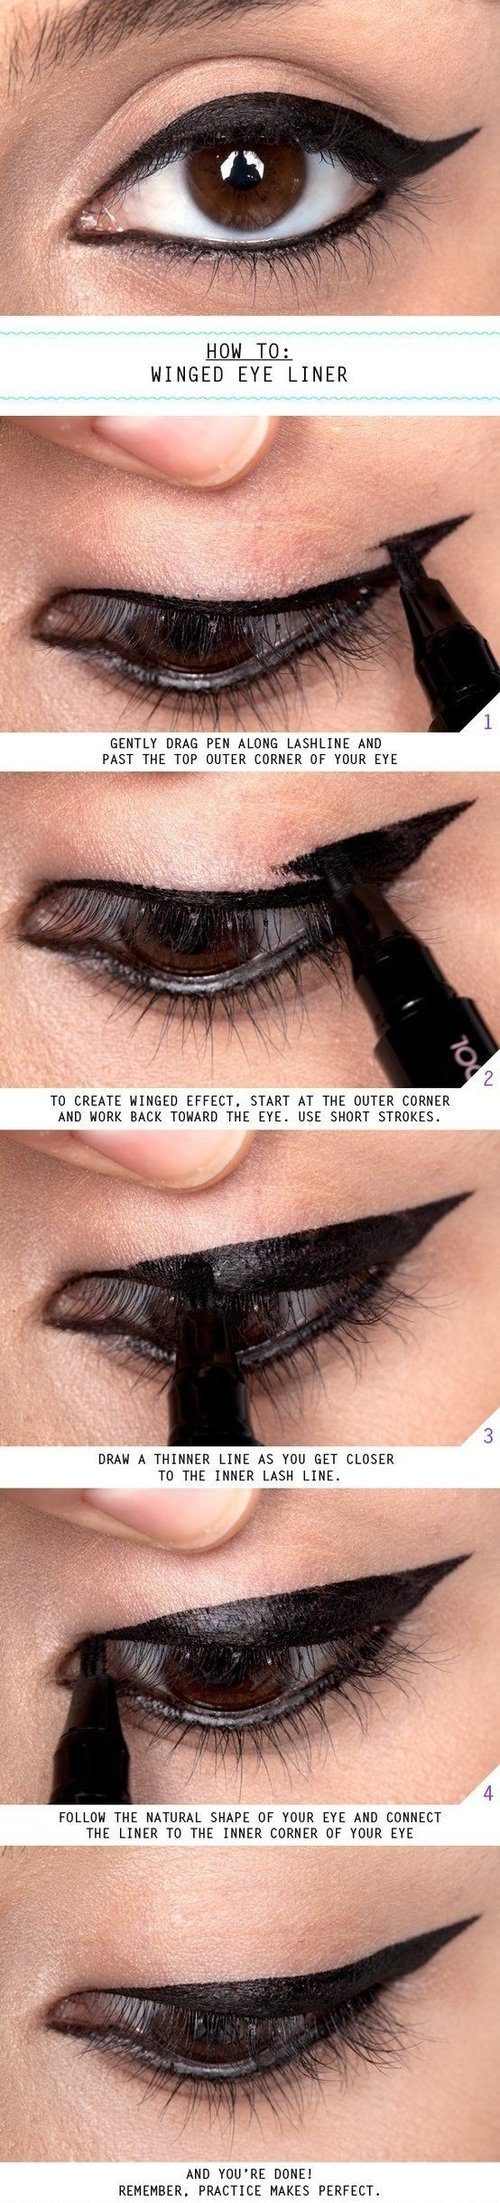 how to winged #makeup tutorial
#eye